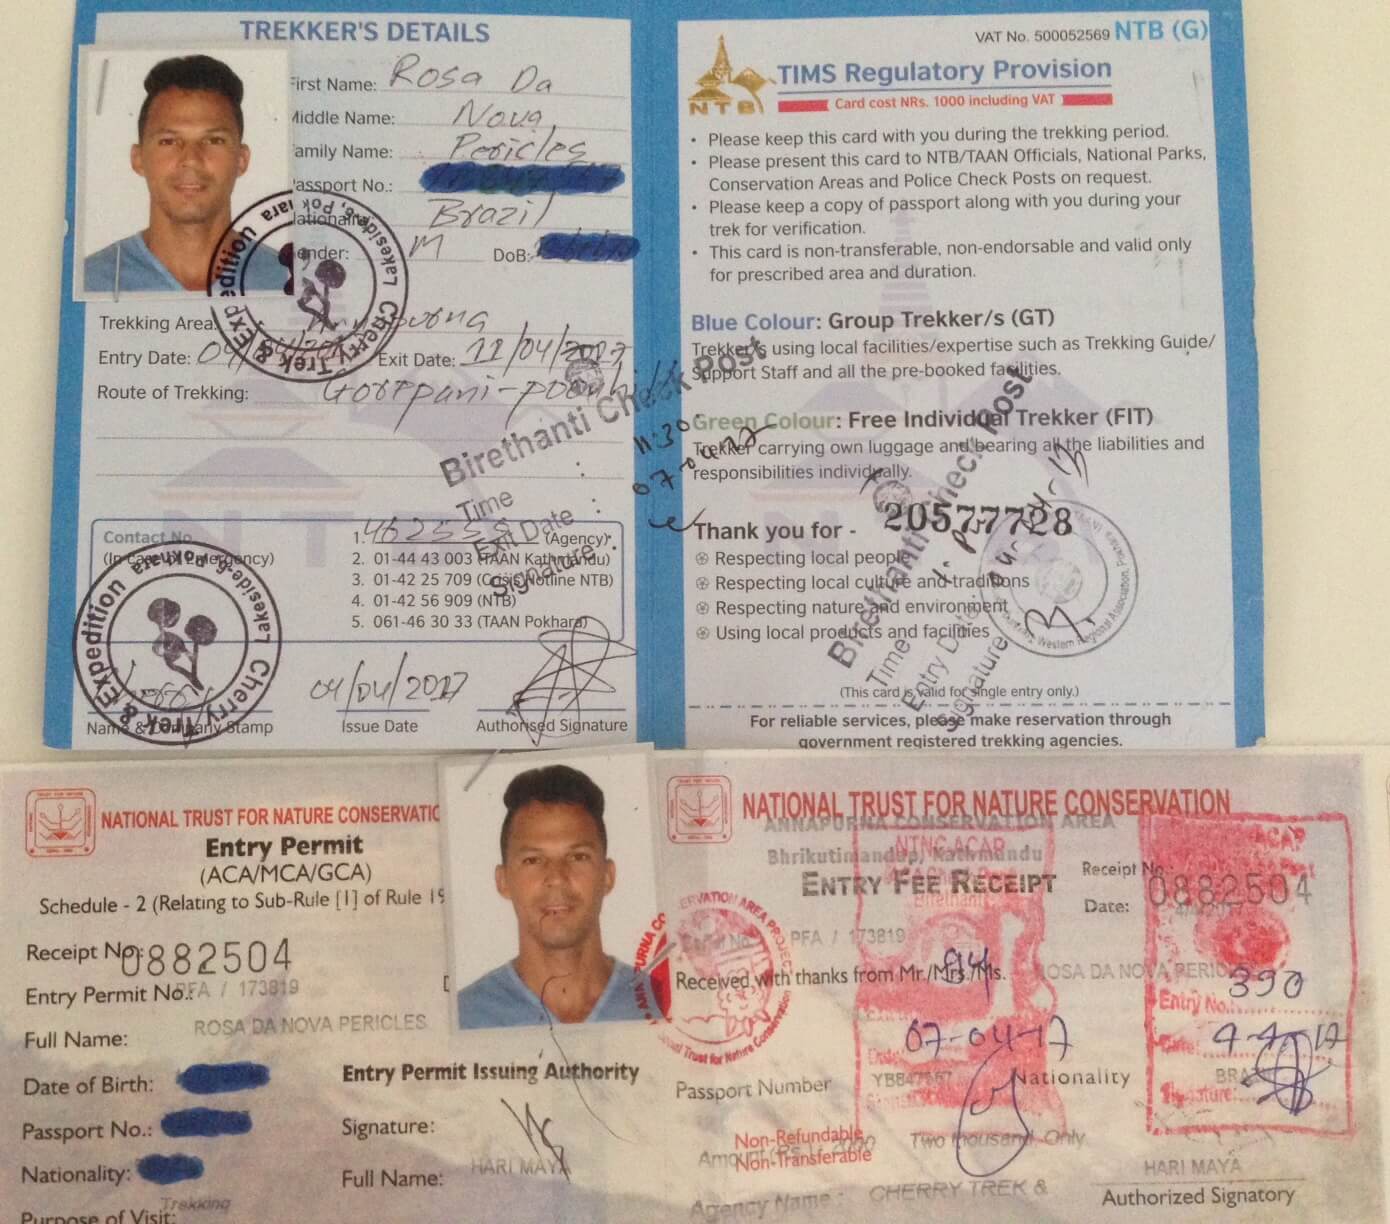 TIMS card and permits that travellers need to get in order to go for a trek in Nepal